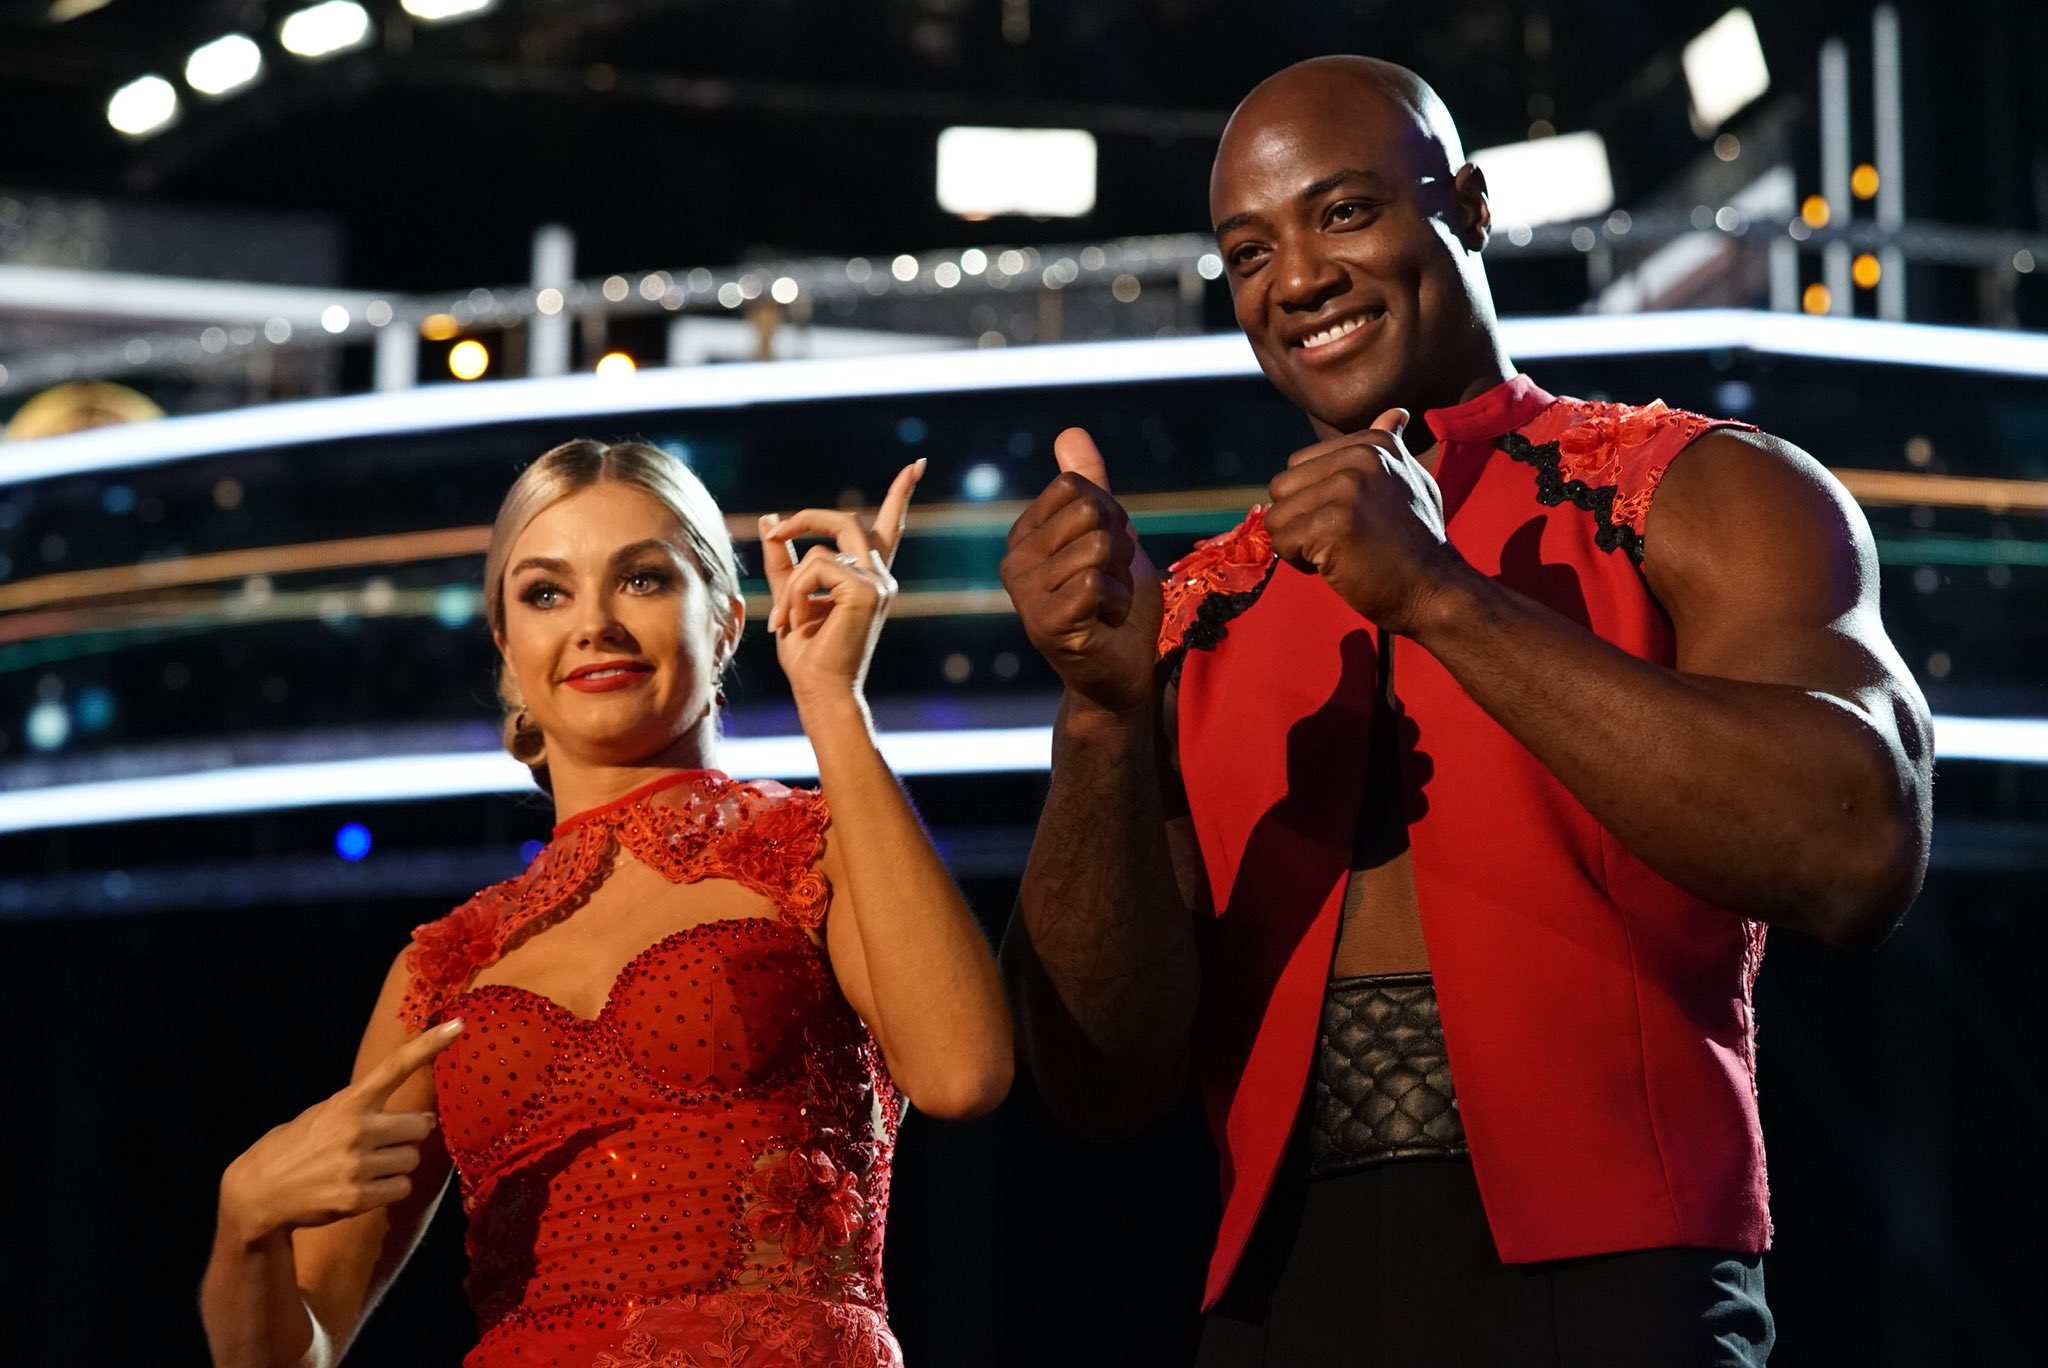 PHOTO: DeMarcus Ware, former NFL star, with his partner Lindsay Arnold, scored a 26-out-of-30 on the Monday, Oct. 8, 2018, episode of "Dancing with the Stars."